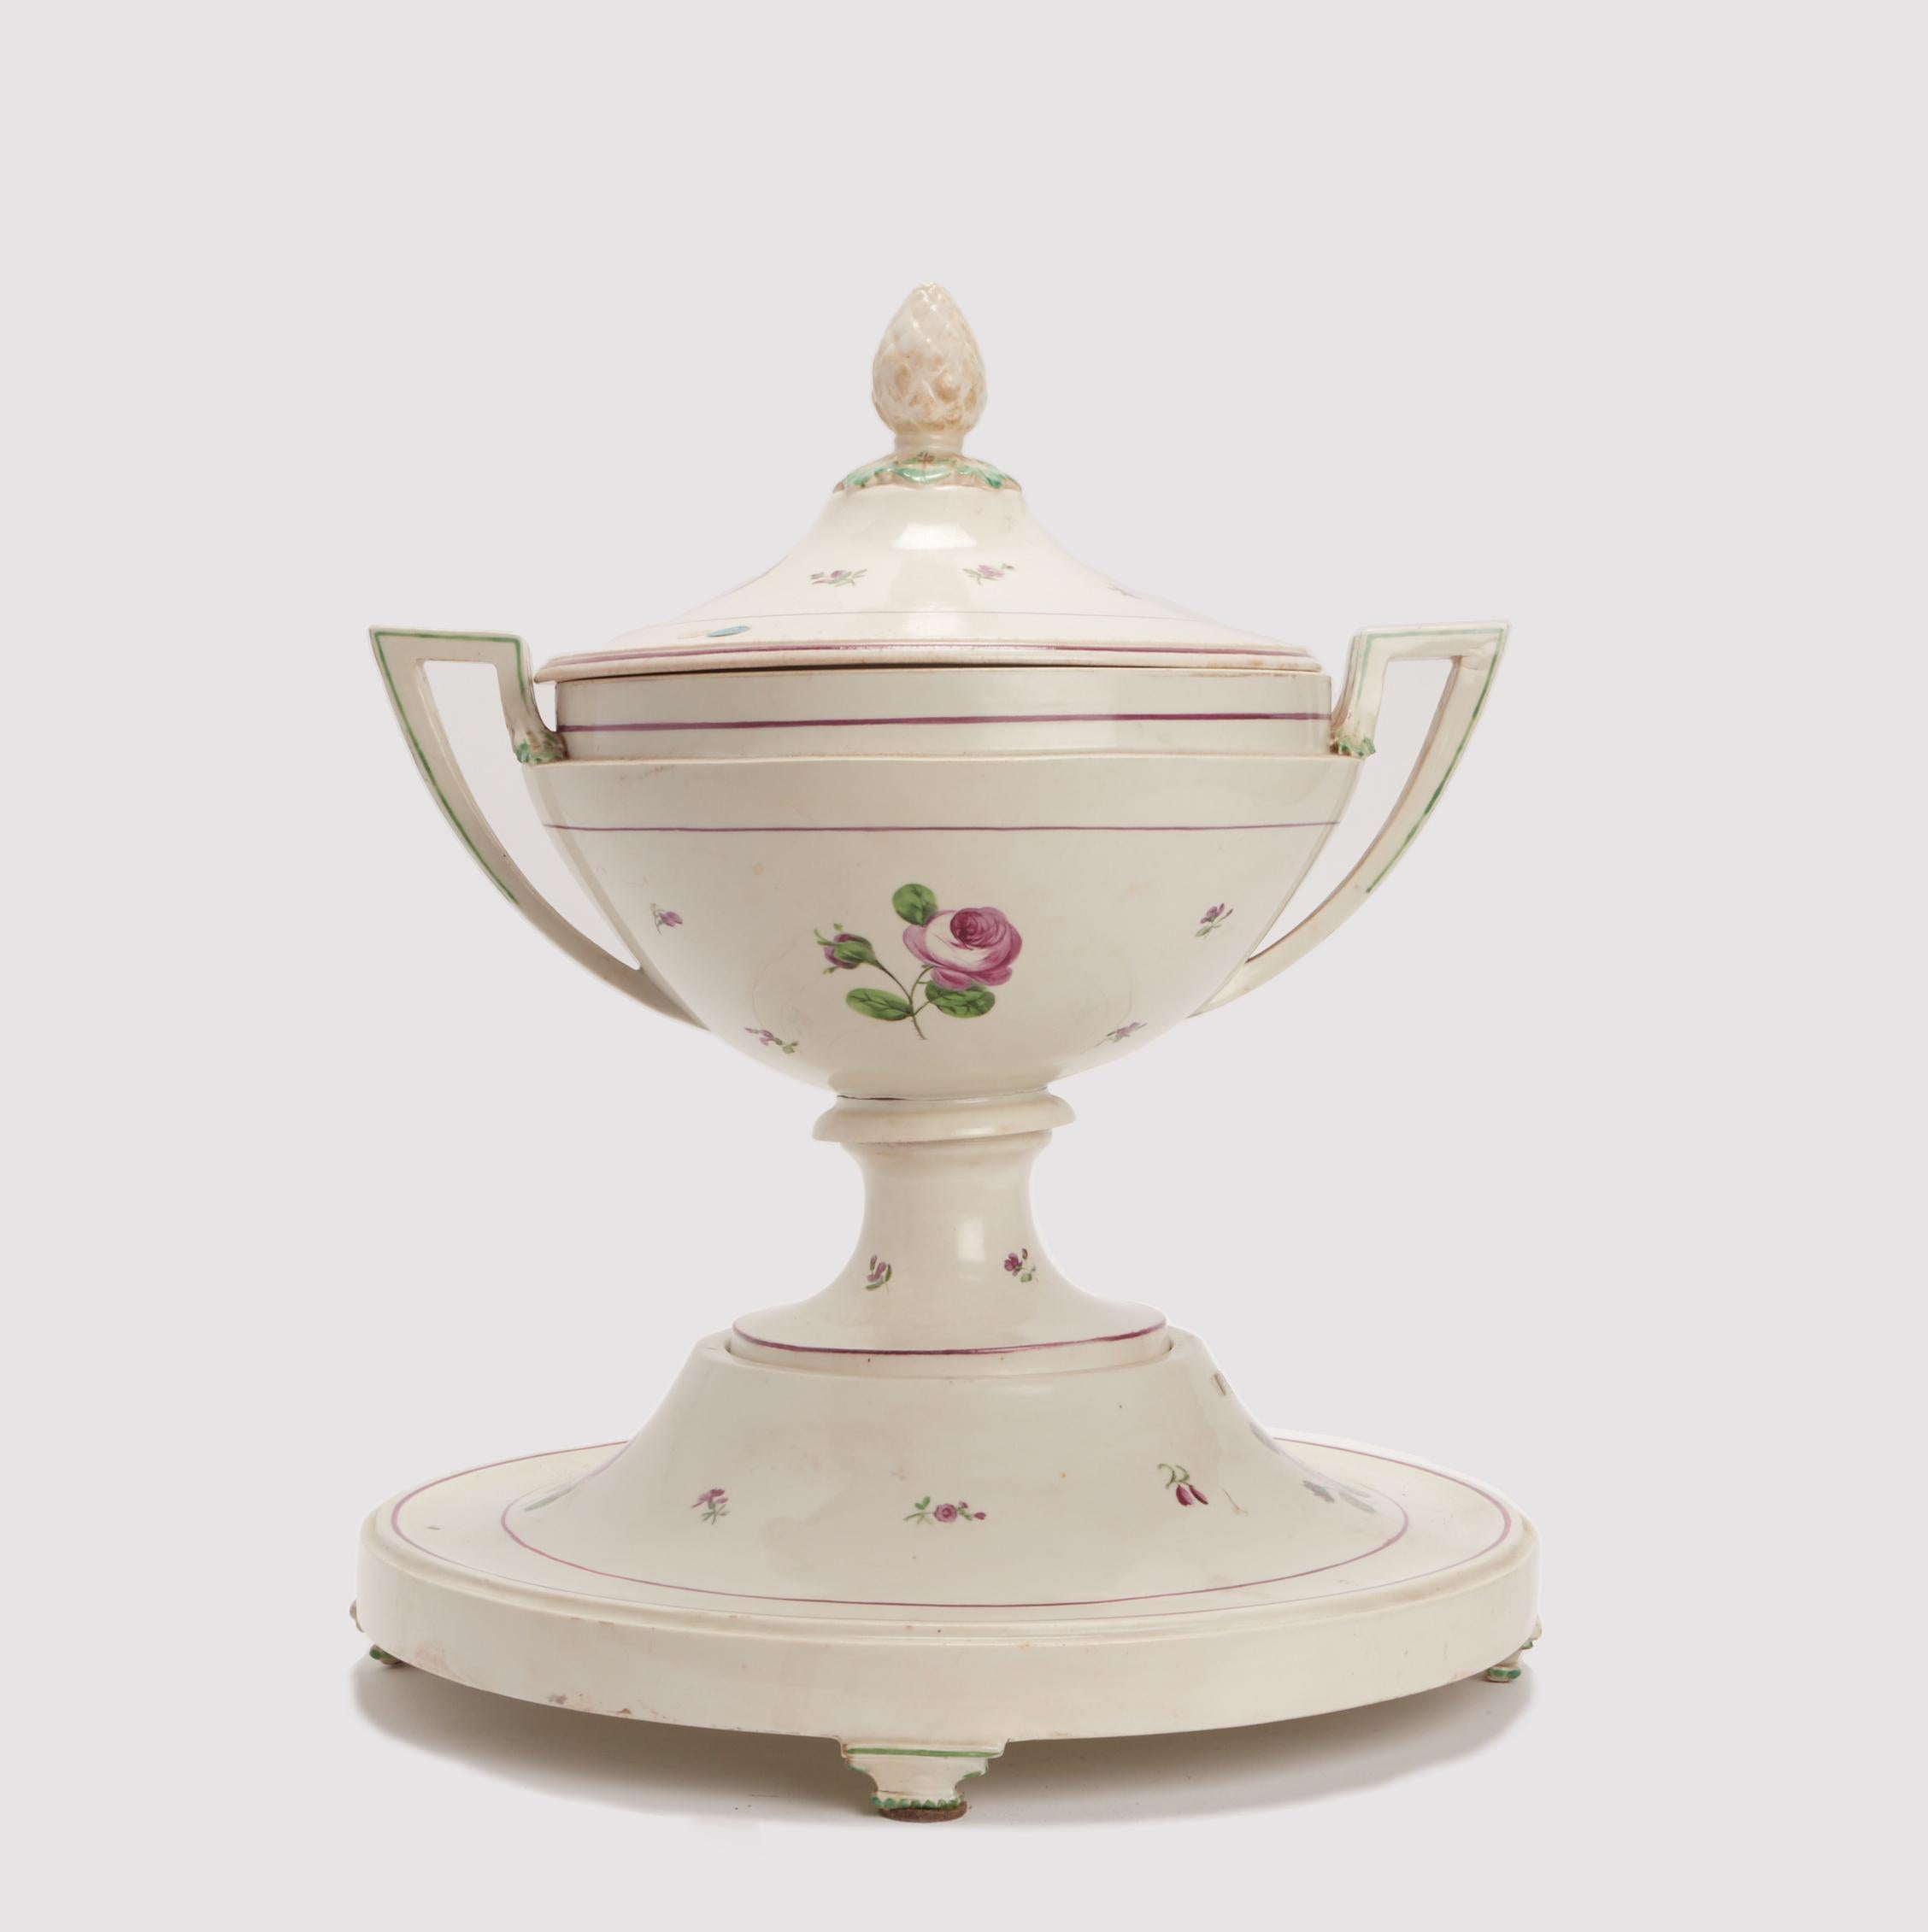 Pair of soup terrine with bases and angled handles, old Vienna Porcelain manufactory, decorated with roses motives over a white field. Underlined with light purple and green lines. Geometrically shaped feet, top of the cover decorated with leaves